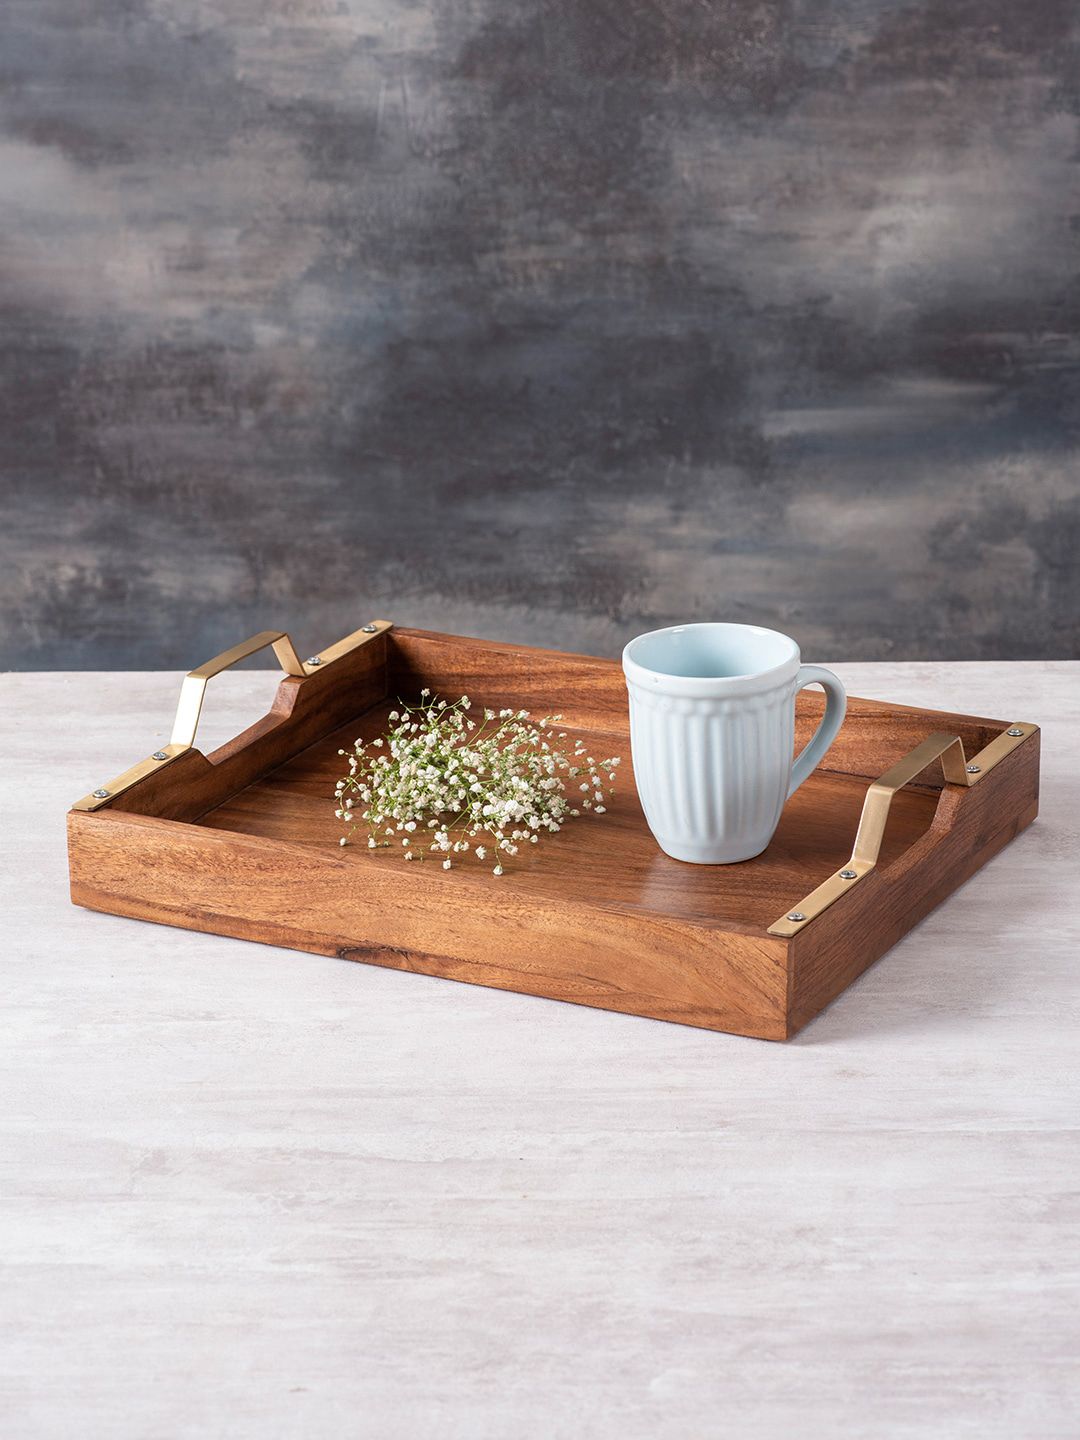 nestroots Brown Teak Wood Gold-Toned Serving Tray with Brass Handle Price in India